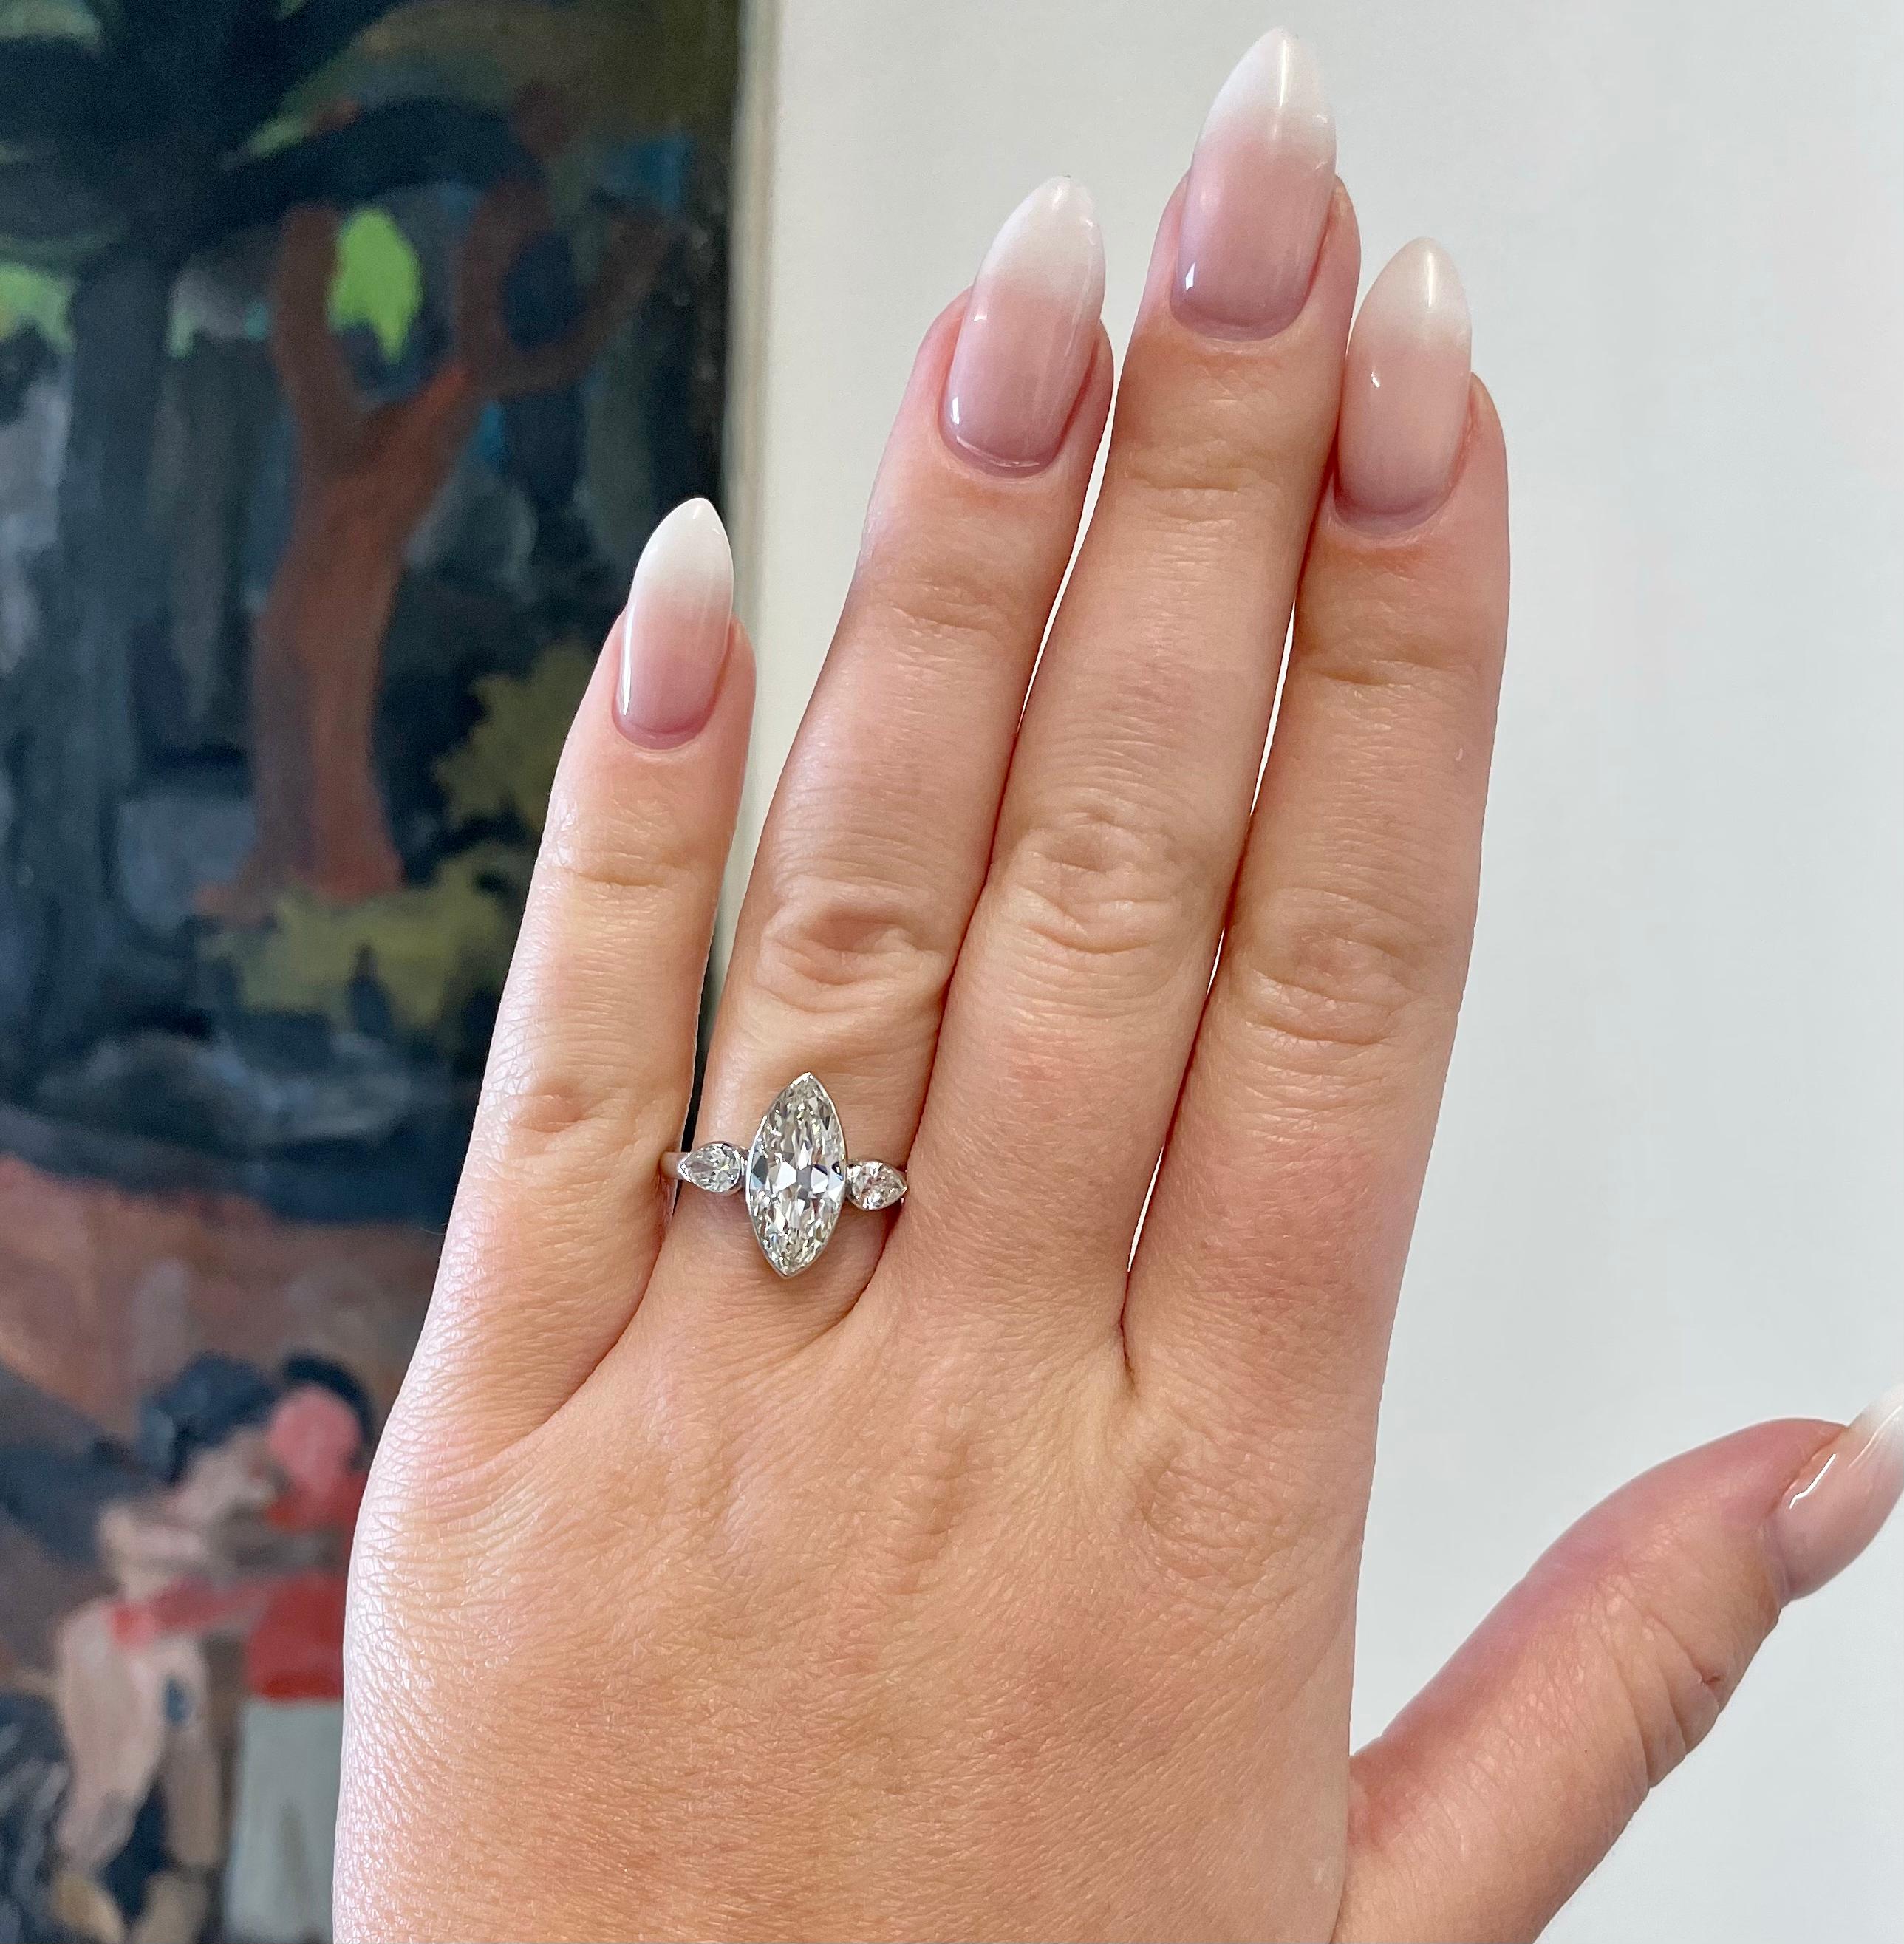 If you are looking for an engagement ring full of character, consider this striking GIA 2.36 Carat Marquise Cut Diamond Platinum Three Stone Engagement Ring. A timeless design that will make you stand out from the crowd. 

The center diamond is a